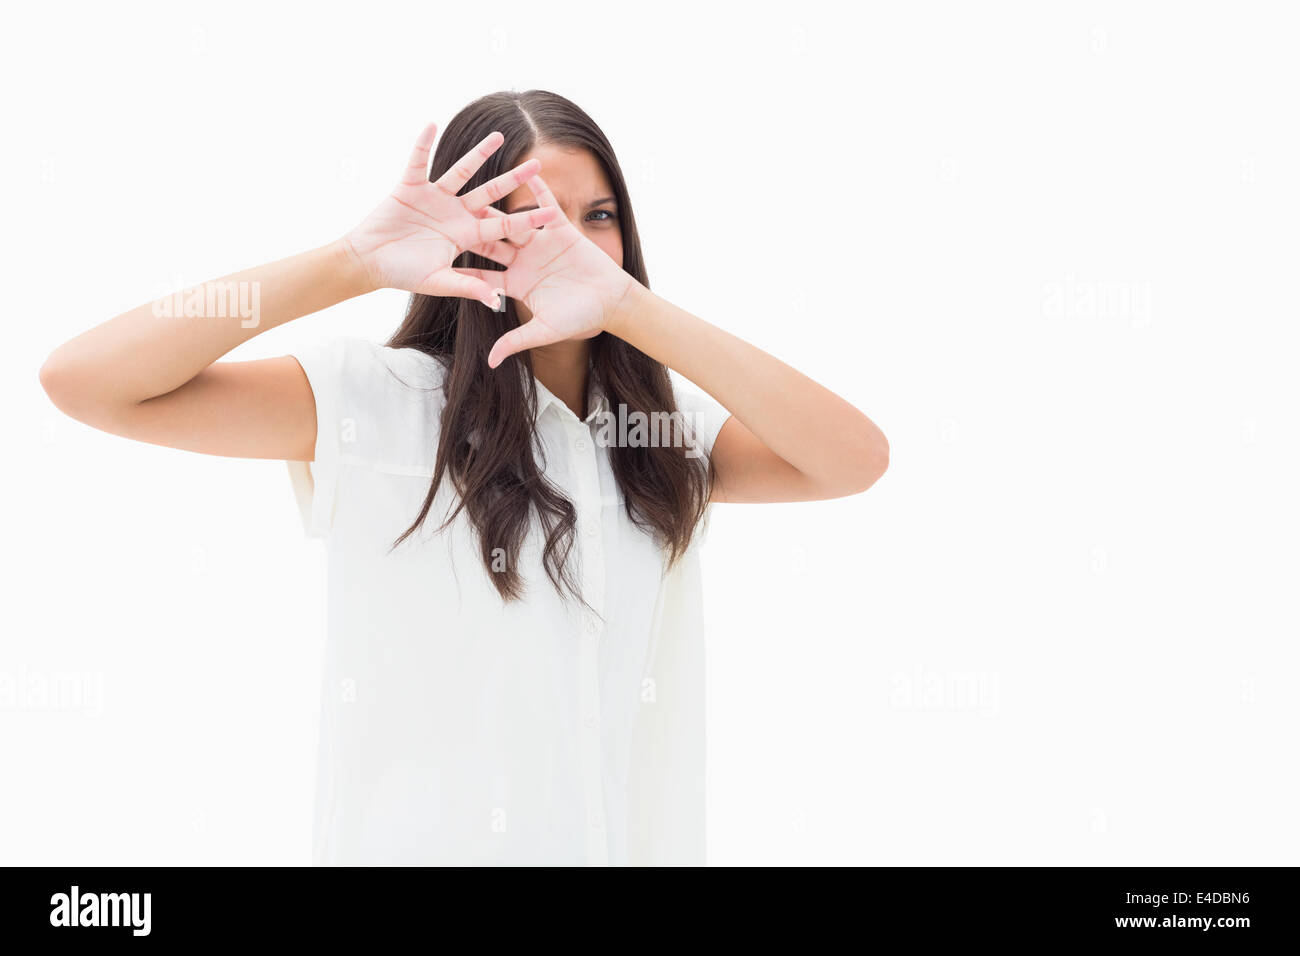 Fearful brunette covering her face Stock Photo